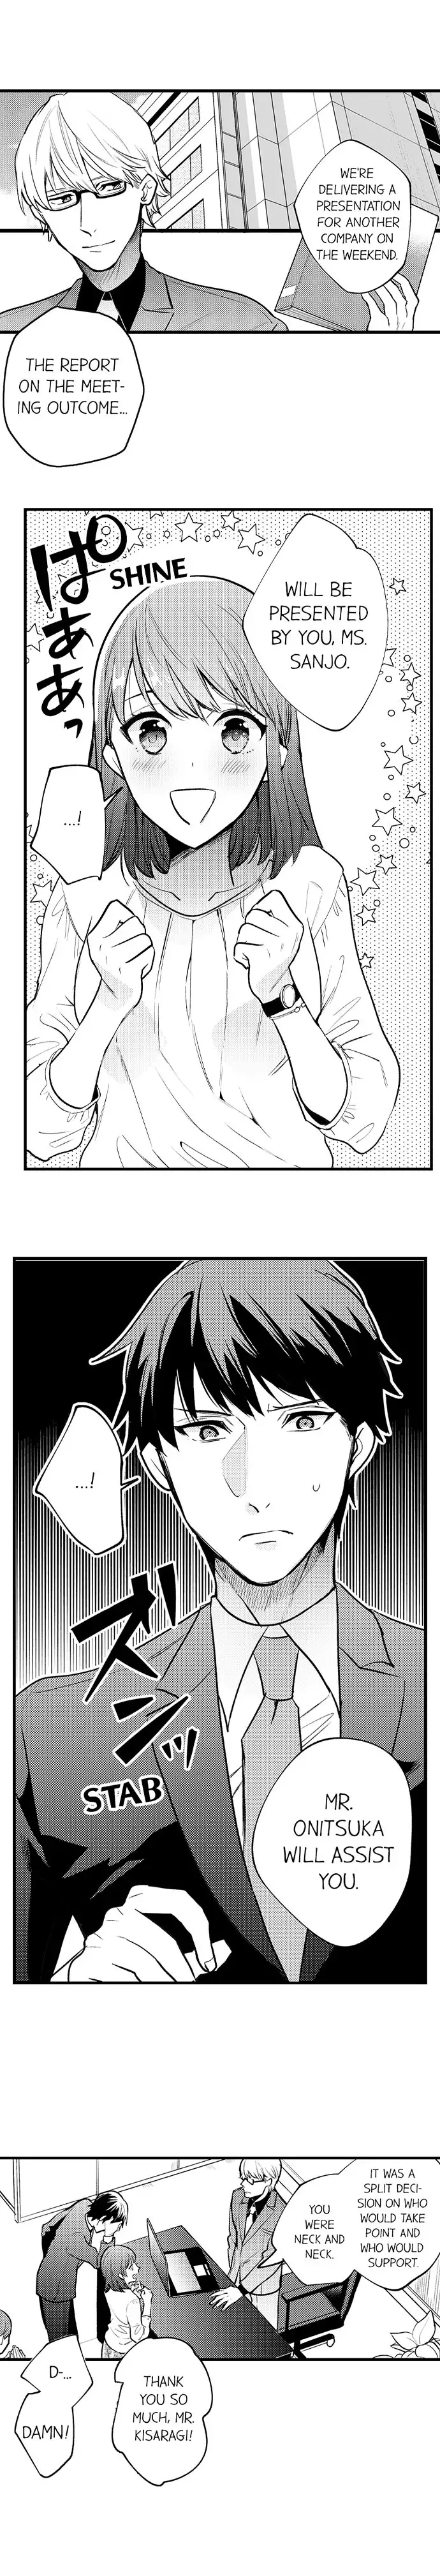 3 Hours + Love Hotel = You’re Mine - Chapter 1 Page 2